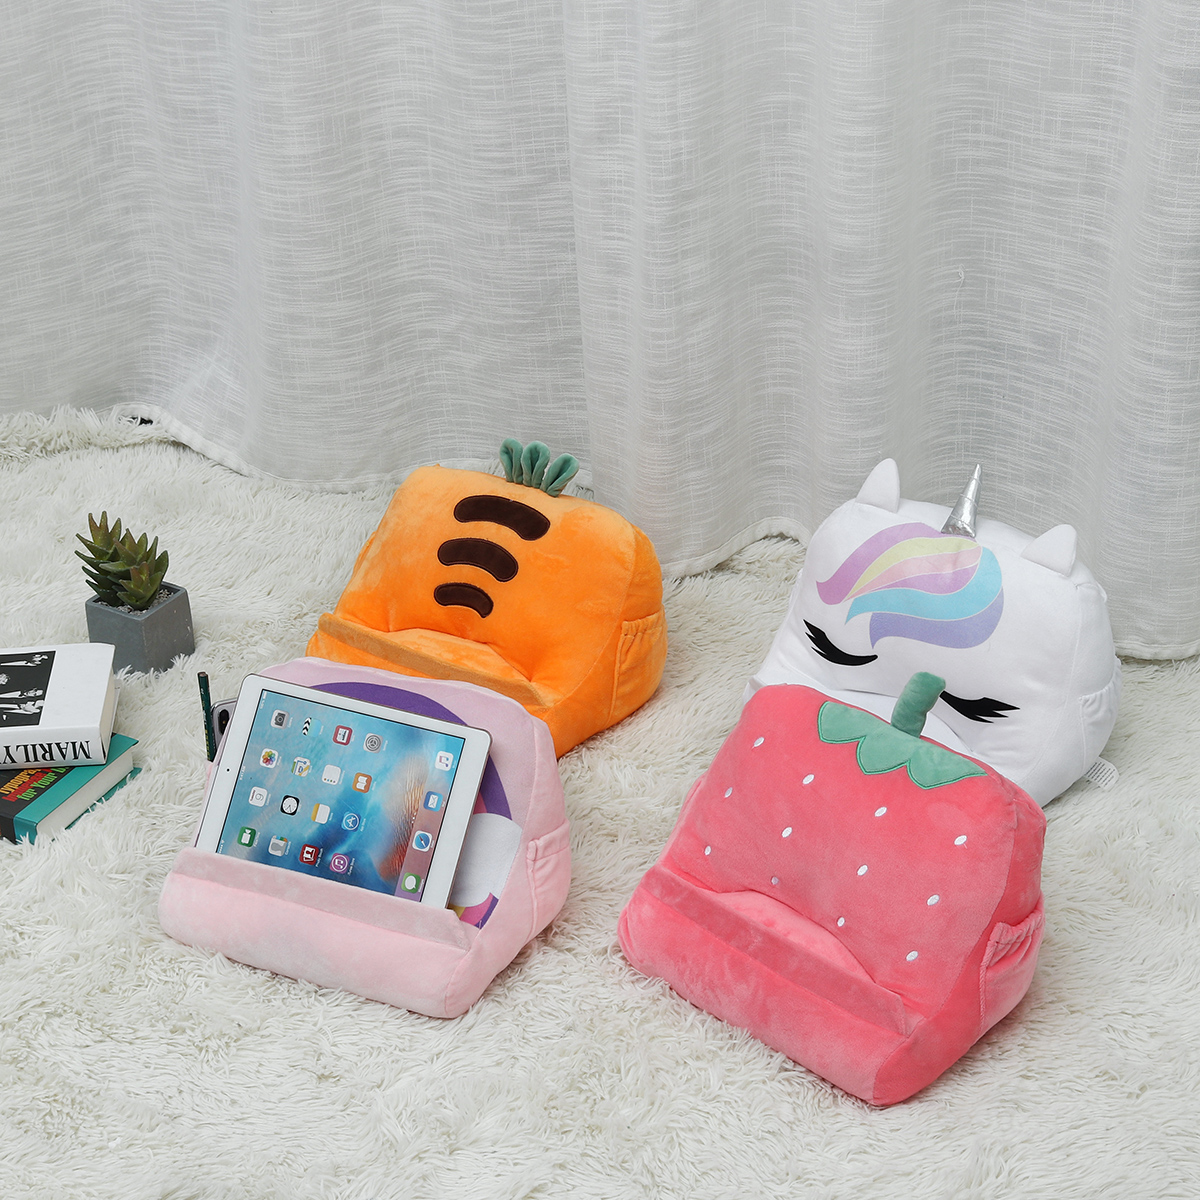 30x20x20cm-Tablet-Pillow-Cushion-Mini-Phone-Holder-Stand-Pocket-Home-Office-1974436-11